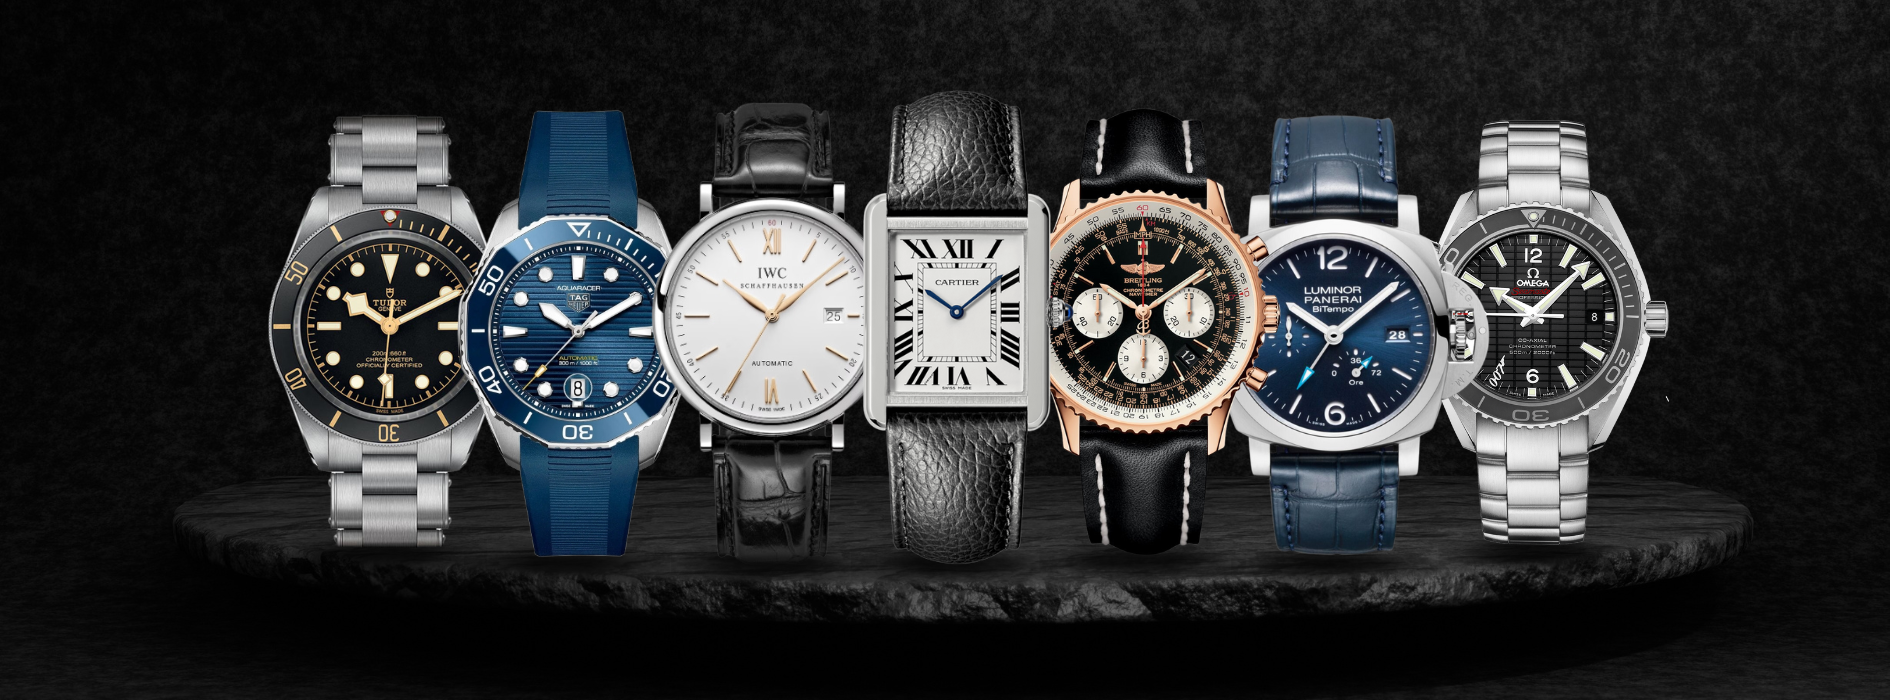 Top Luxury Watch Brands and Their Collections